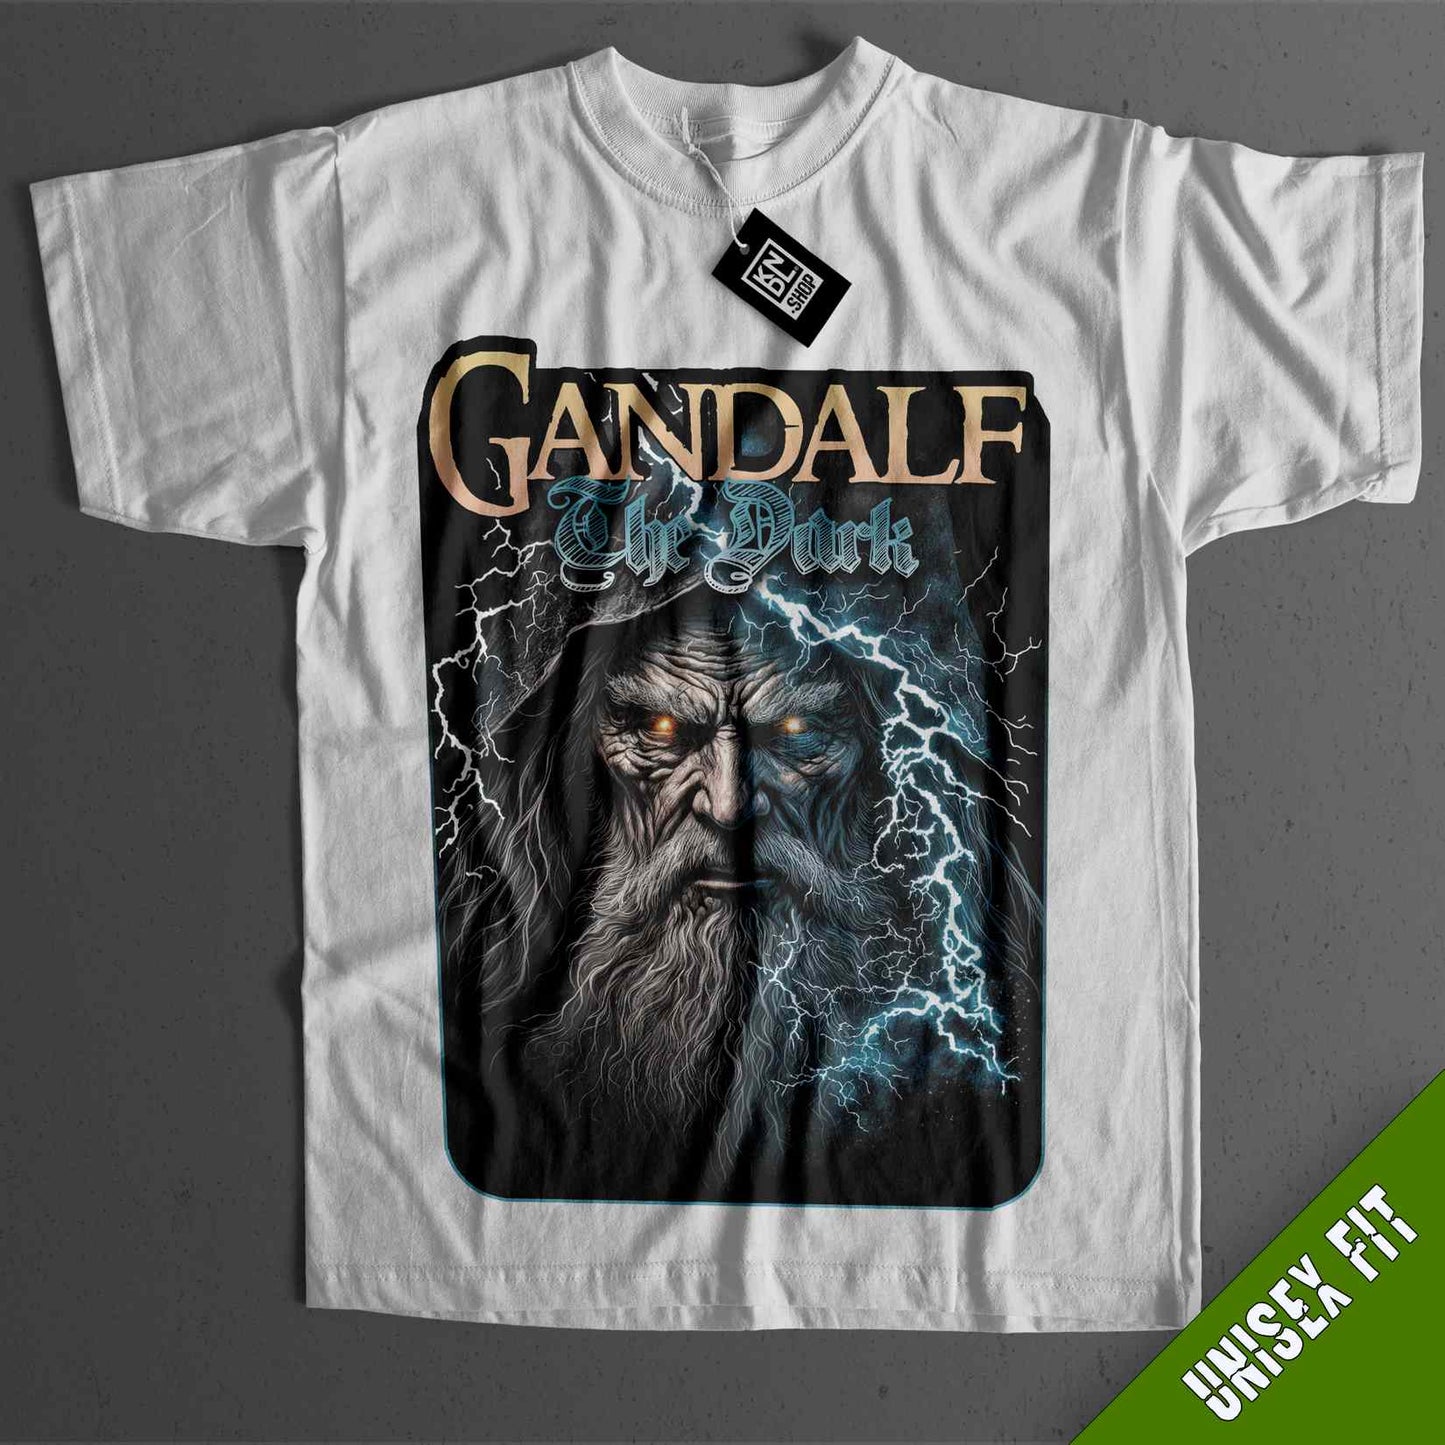 a white t - shirt with an image of gandale on it